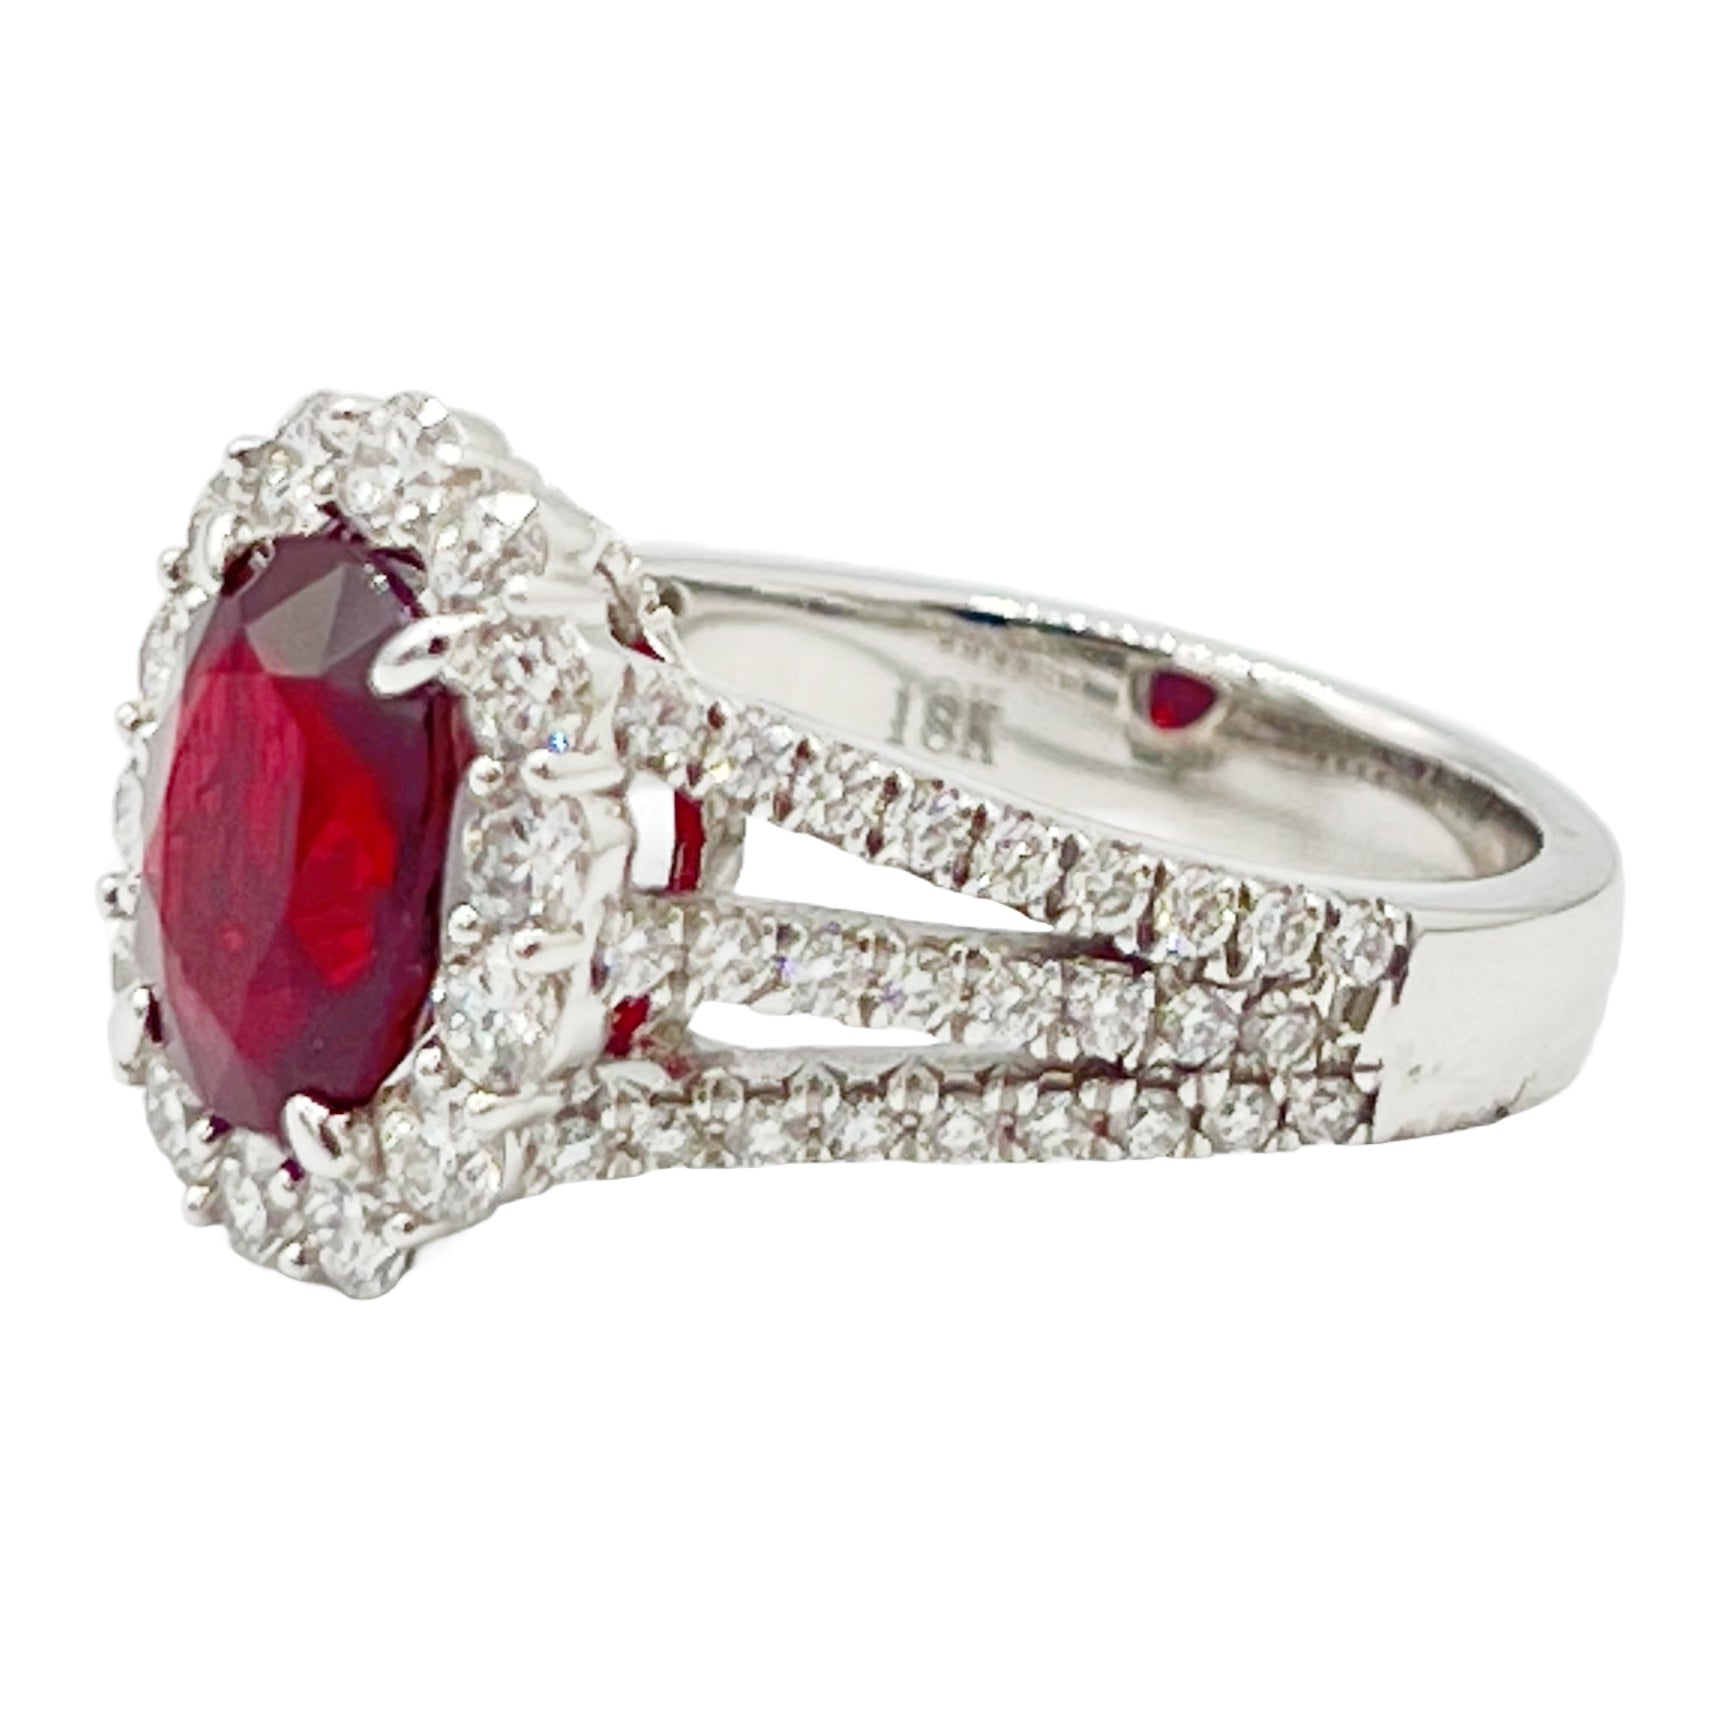 Ring 18KW/6.5G 1RUBY-2.72CT 14RD-0.77CT 68RD-0.53CT